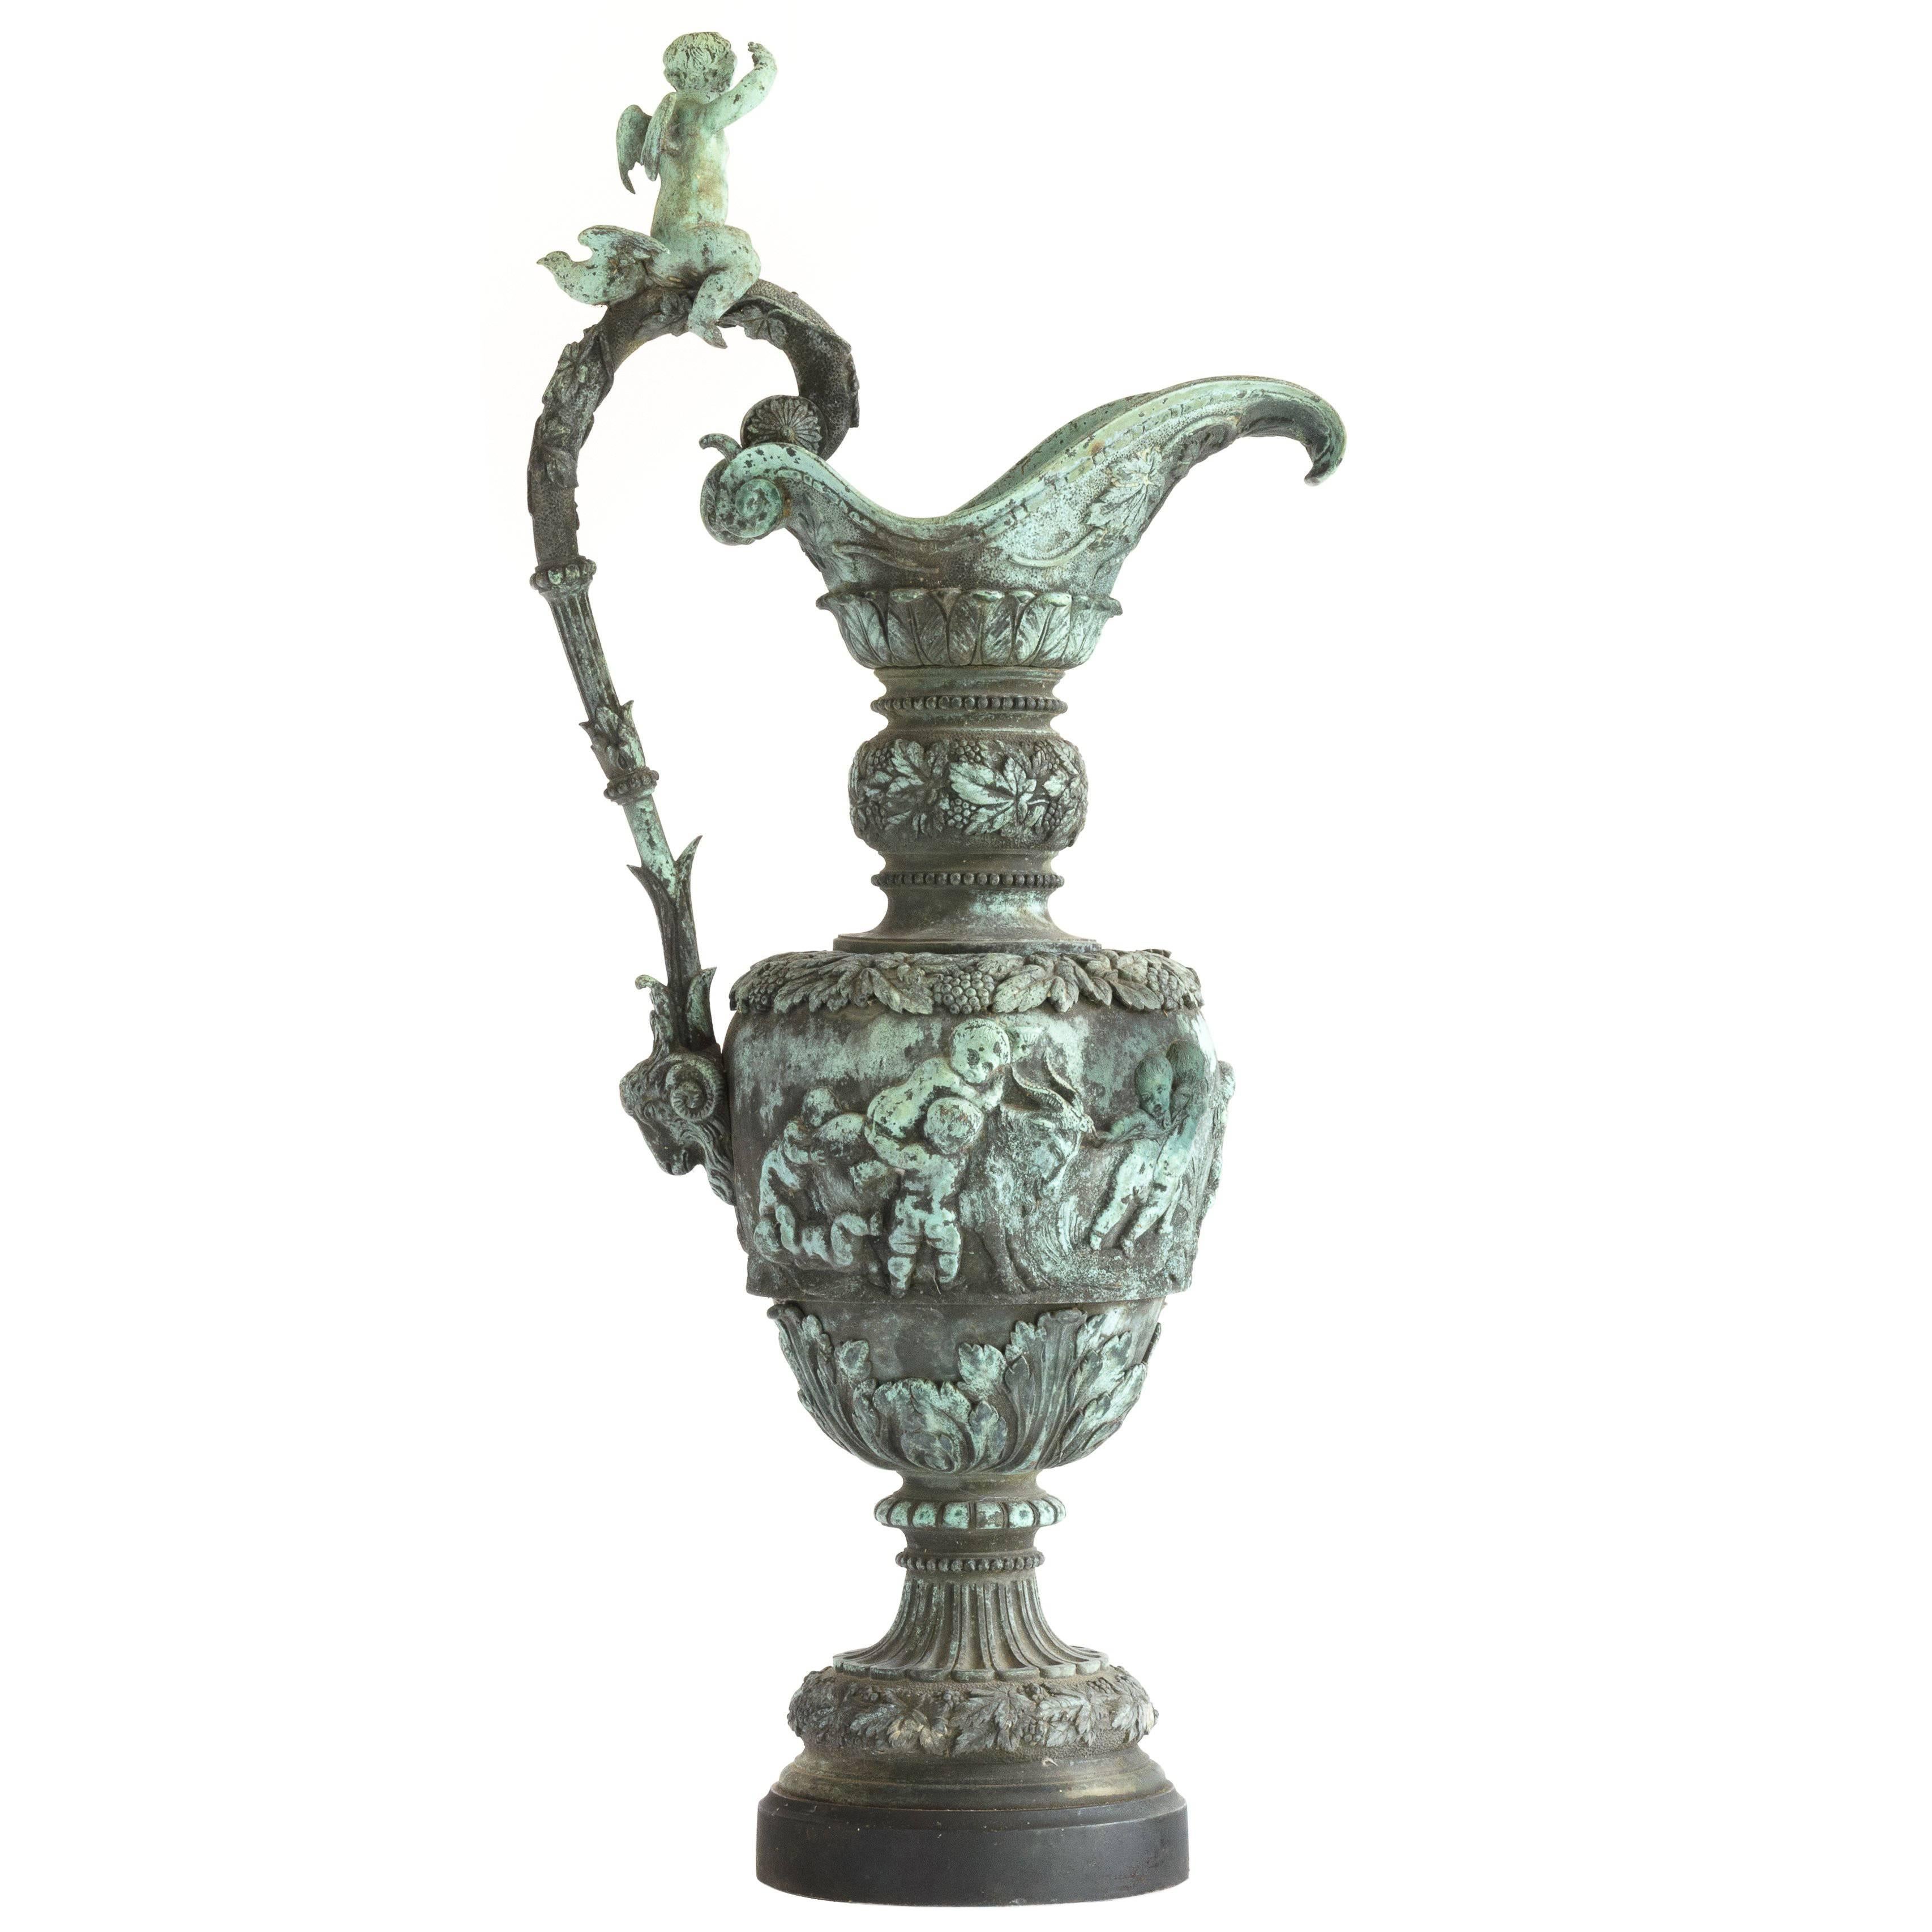 Exceptional French Bronze Ewer Attributed to Villemsens of Paris